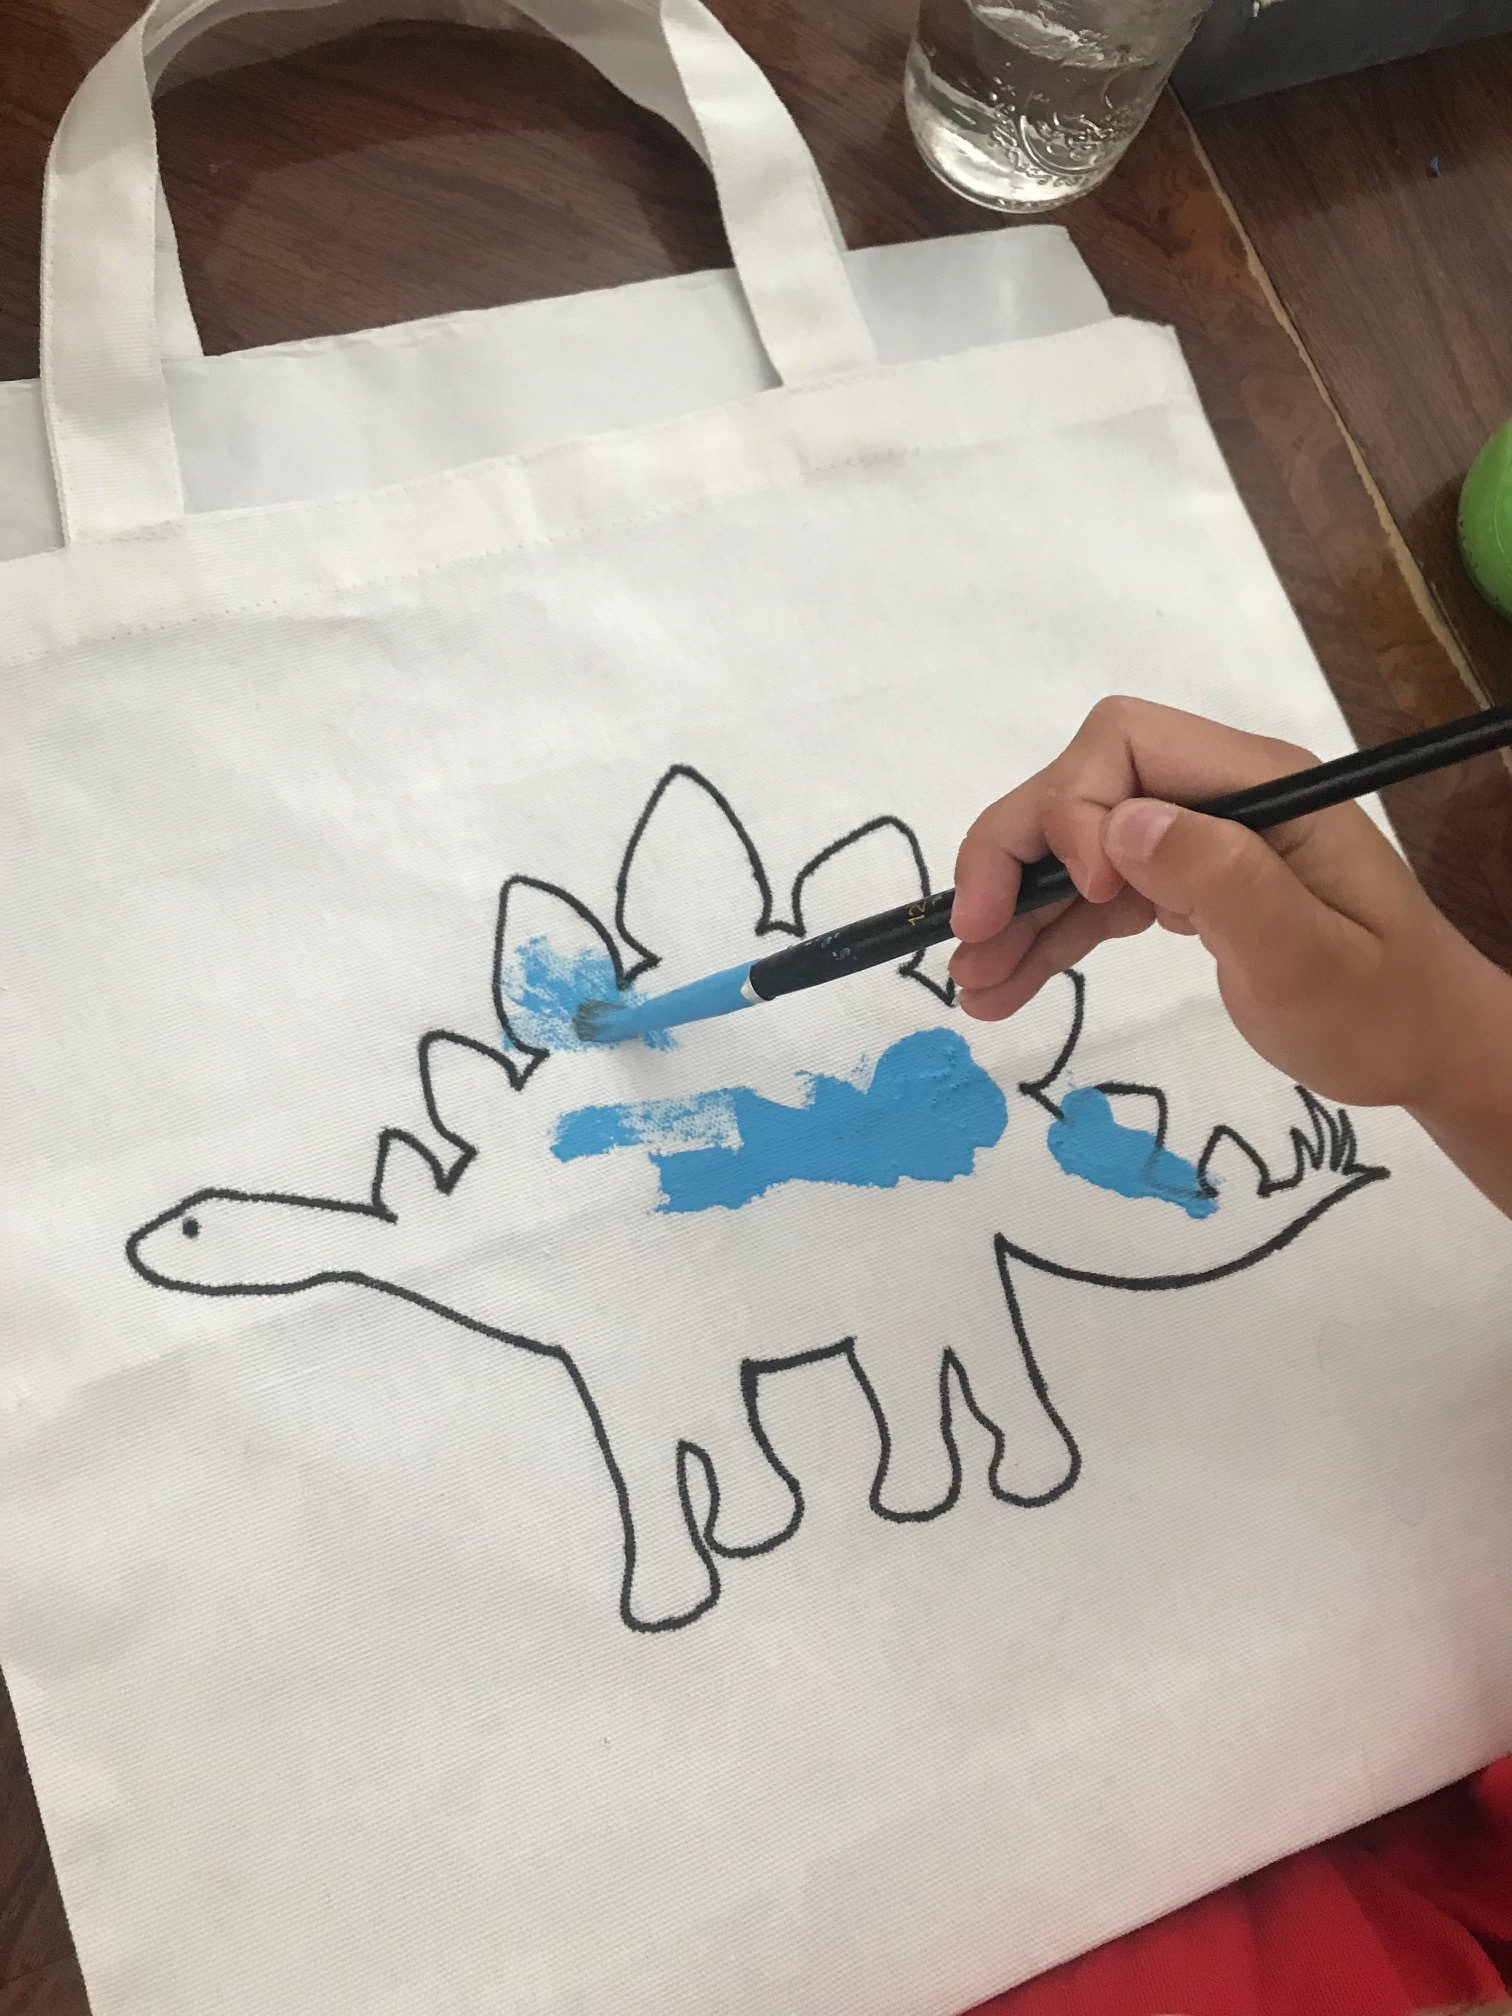 How to Paint on Canvas Tote Bags